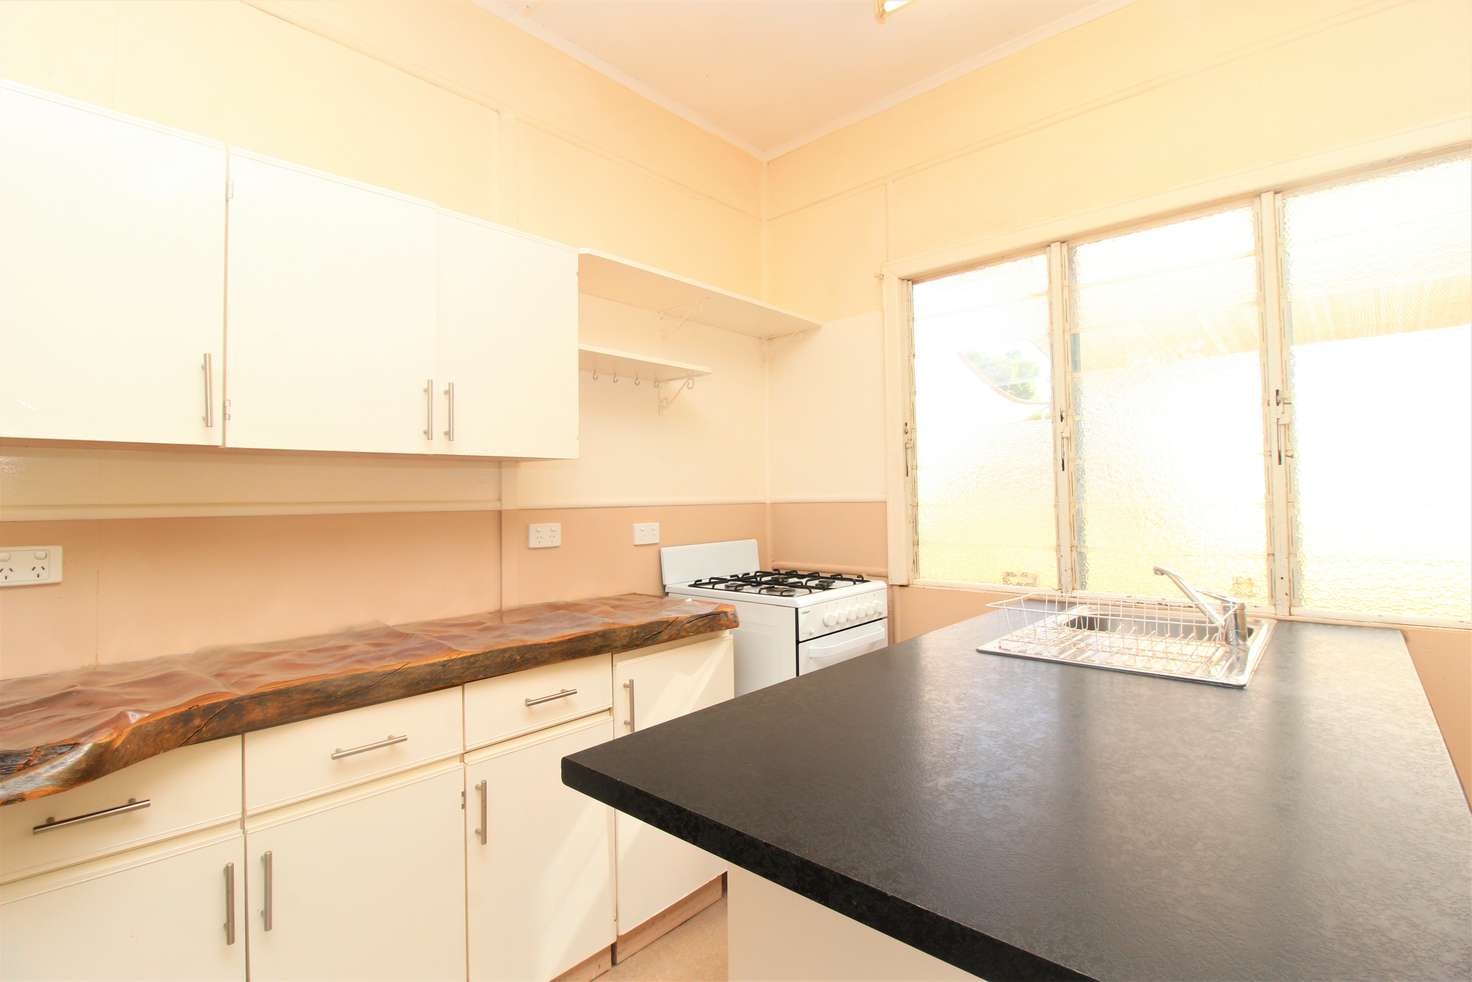 Main view of Homely house listing, 87 Butler St, Mount Isa QLD 4825